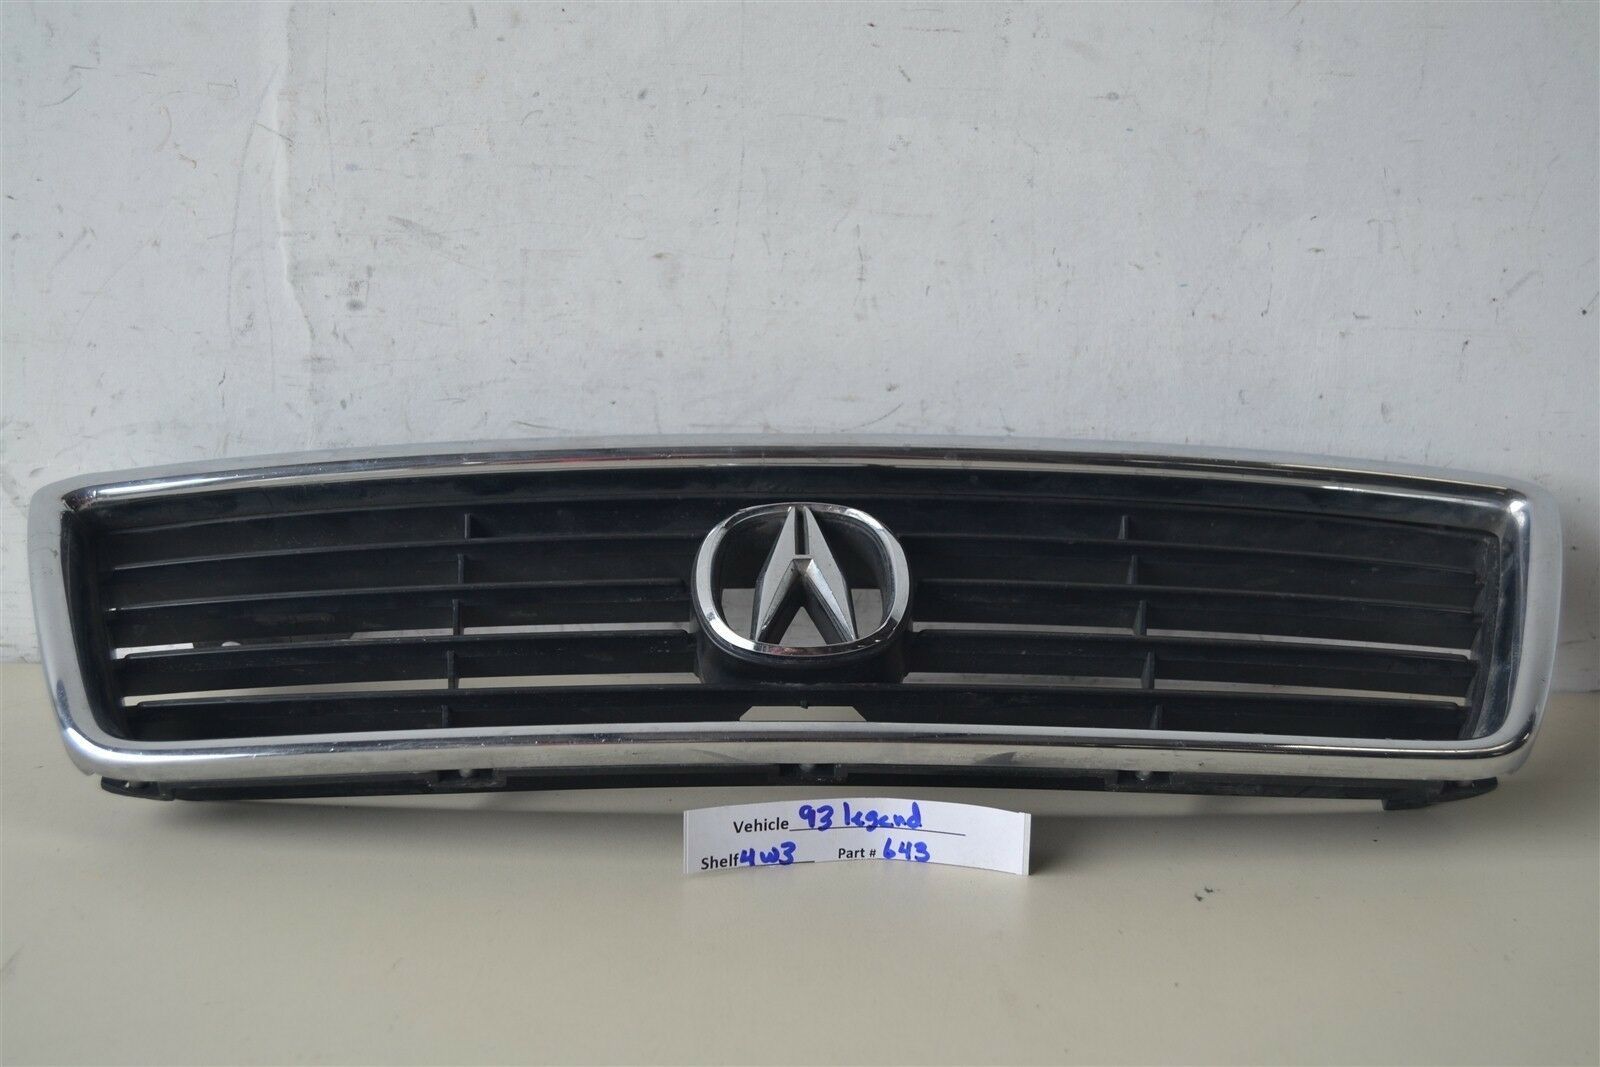 1991-1995 Acura Legend Sedan 4 Dr Front Grill OEM Grille 43 4W3 - $37.04